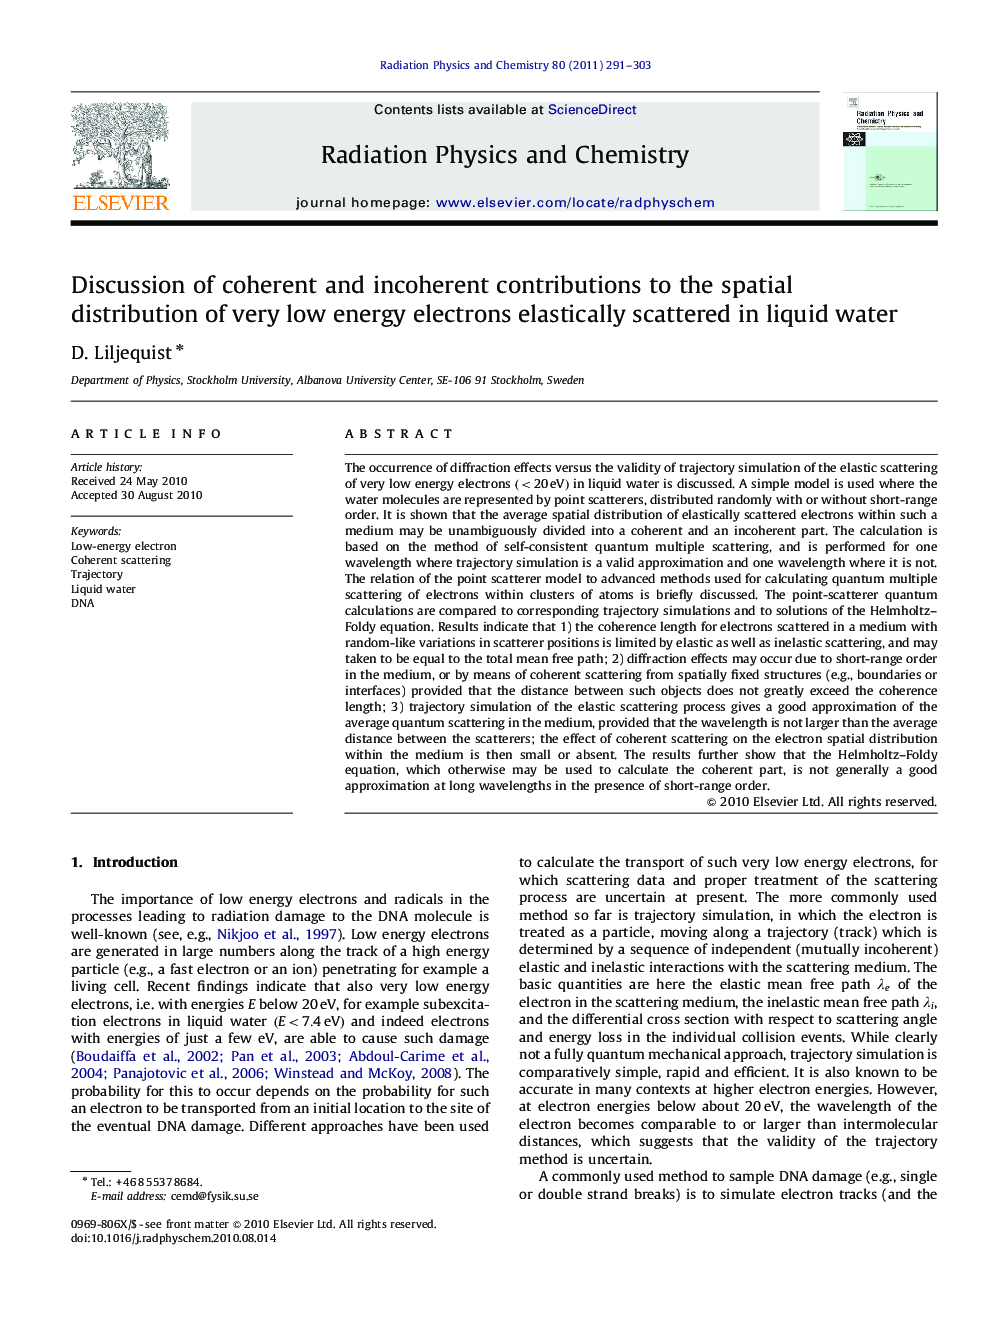 Discussion of coherent and incoherent contributions to the spatial distribution of very low energy electrons elastically scattered in liquid water